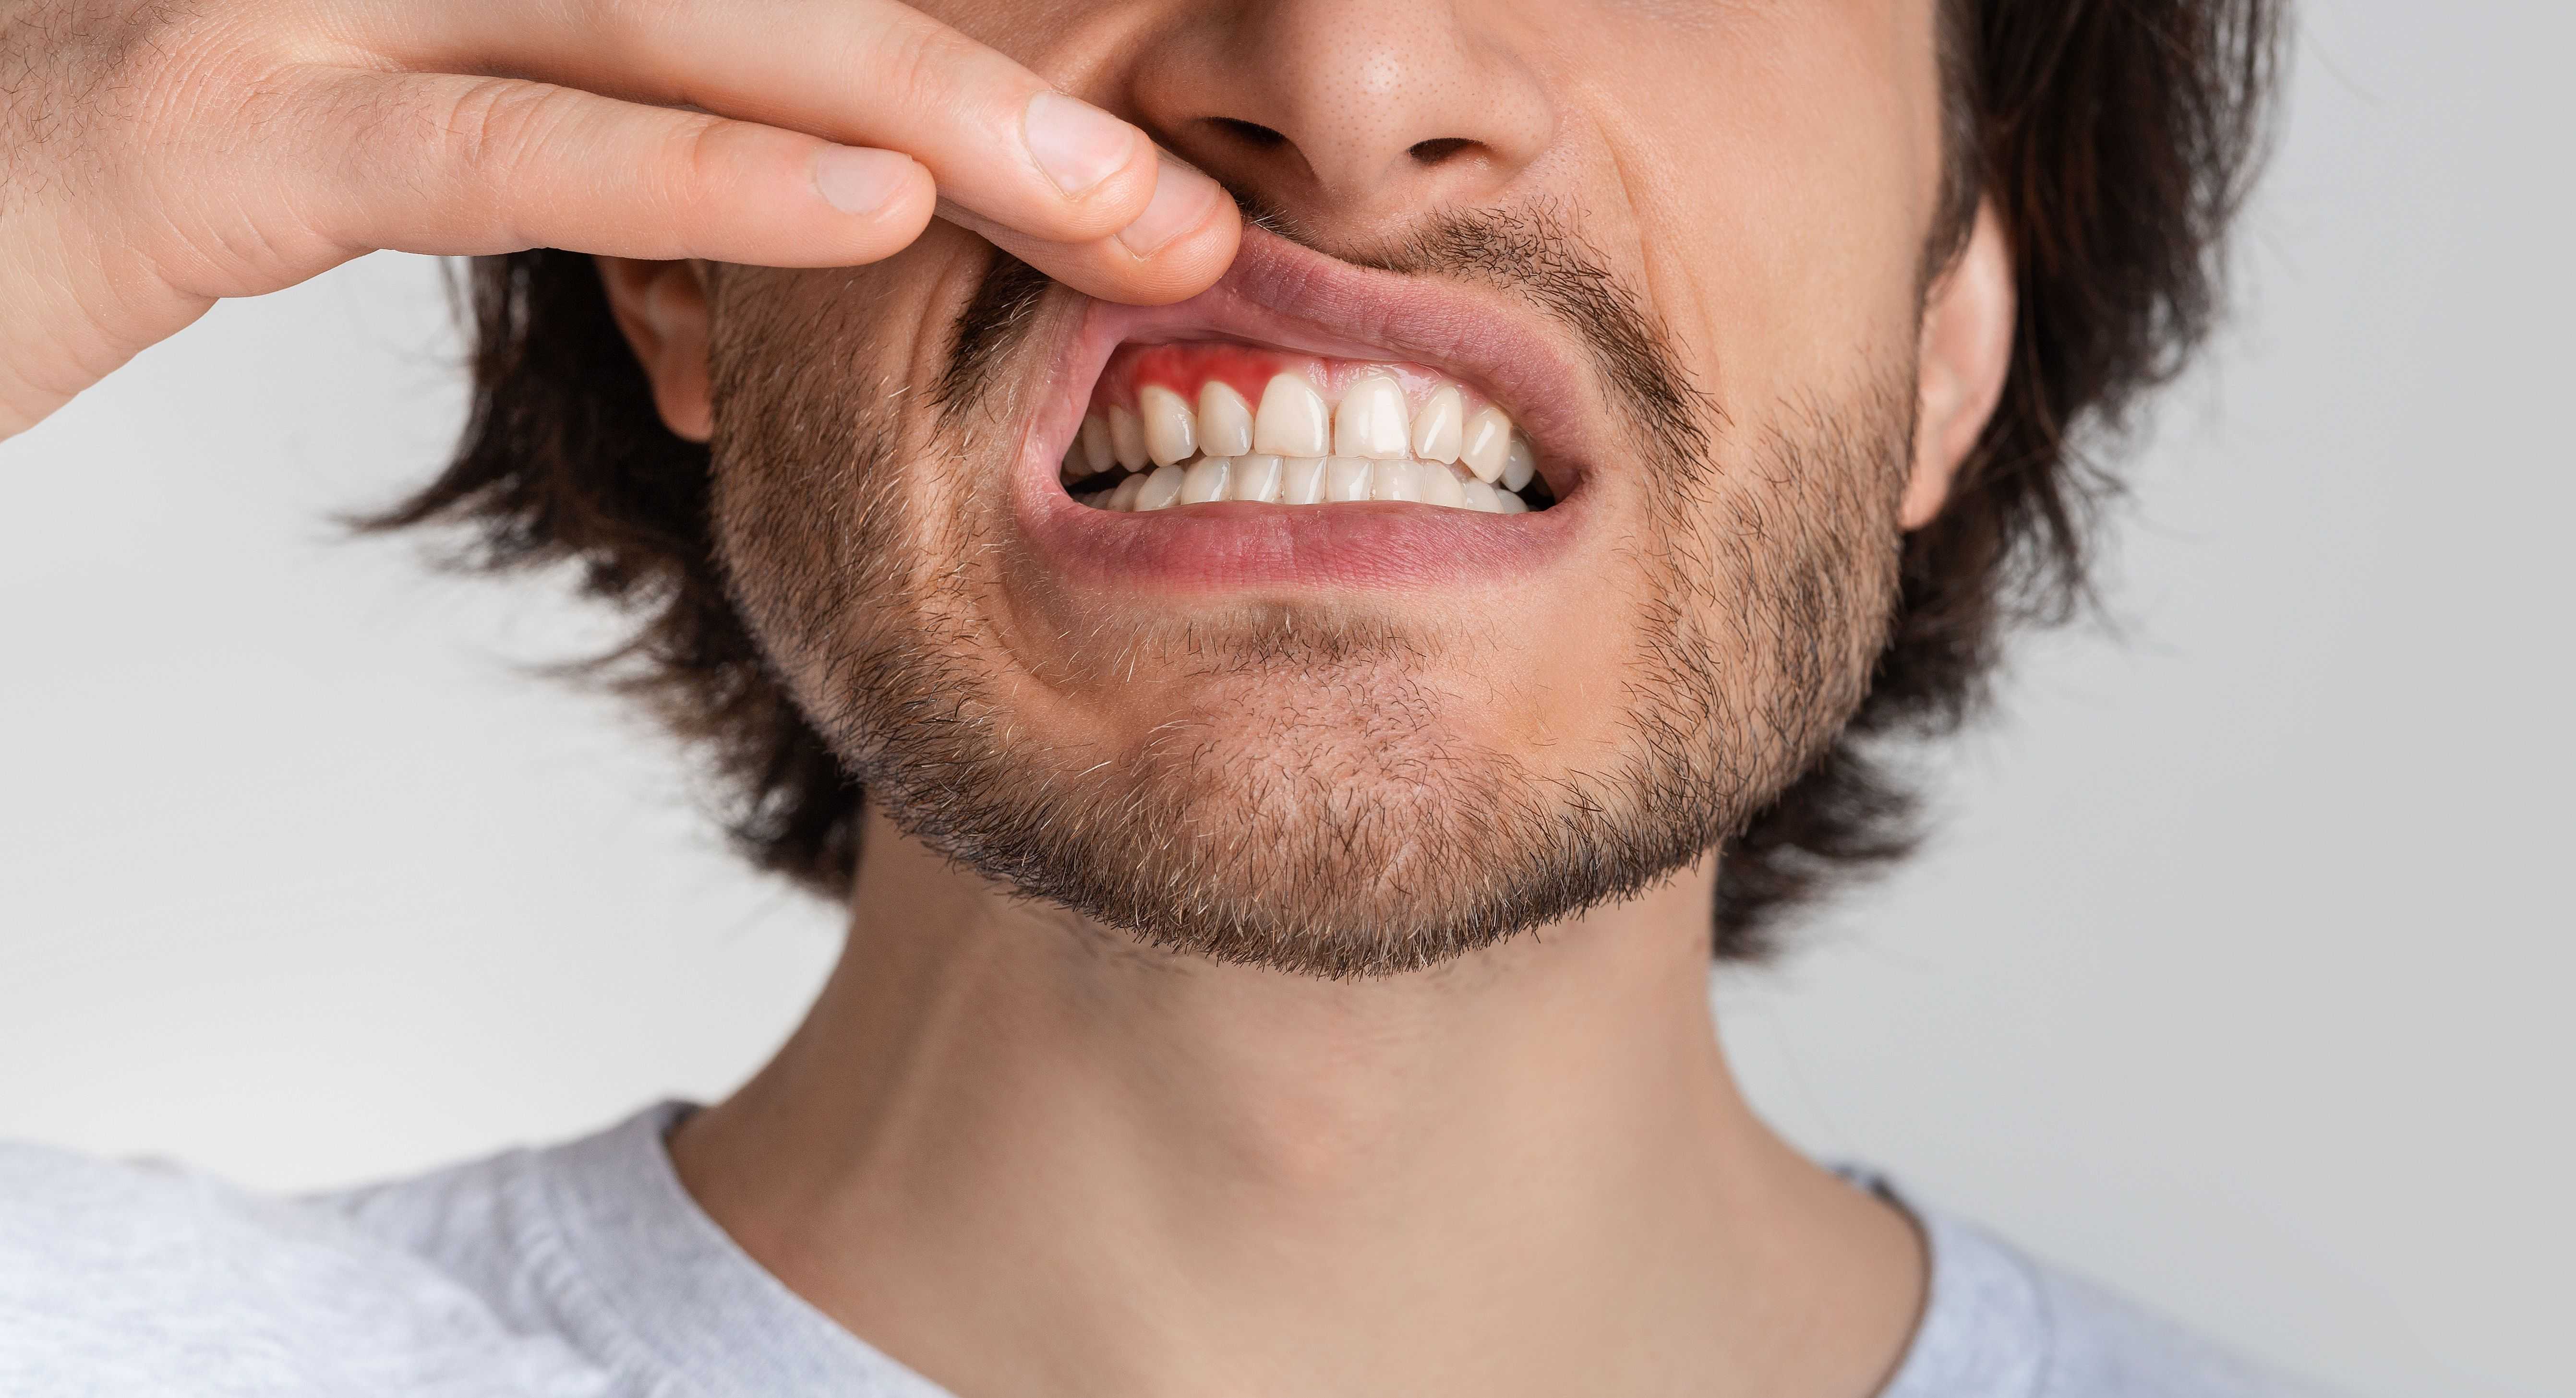 Can Gum Disease Kill You? Yes, Here's How